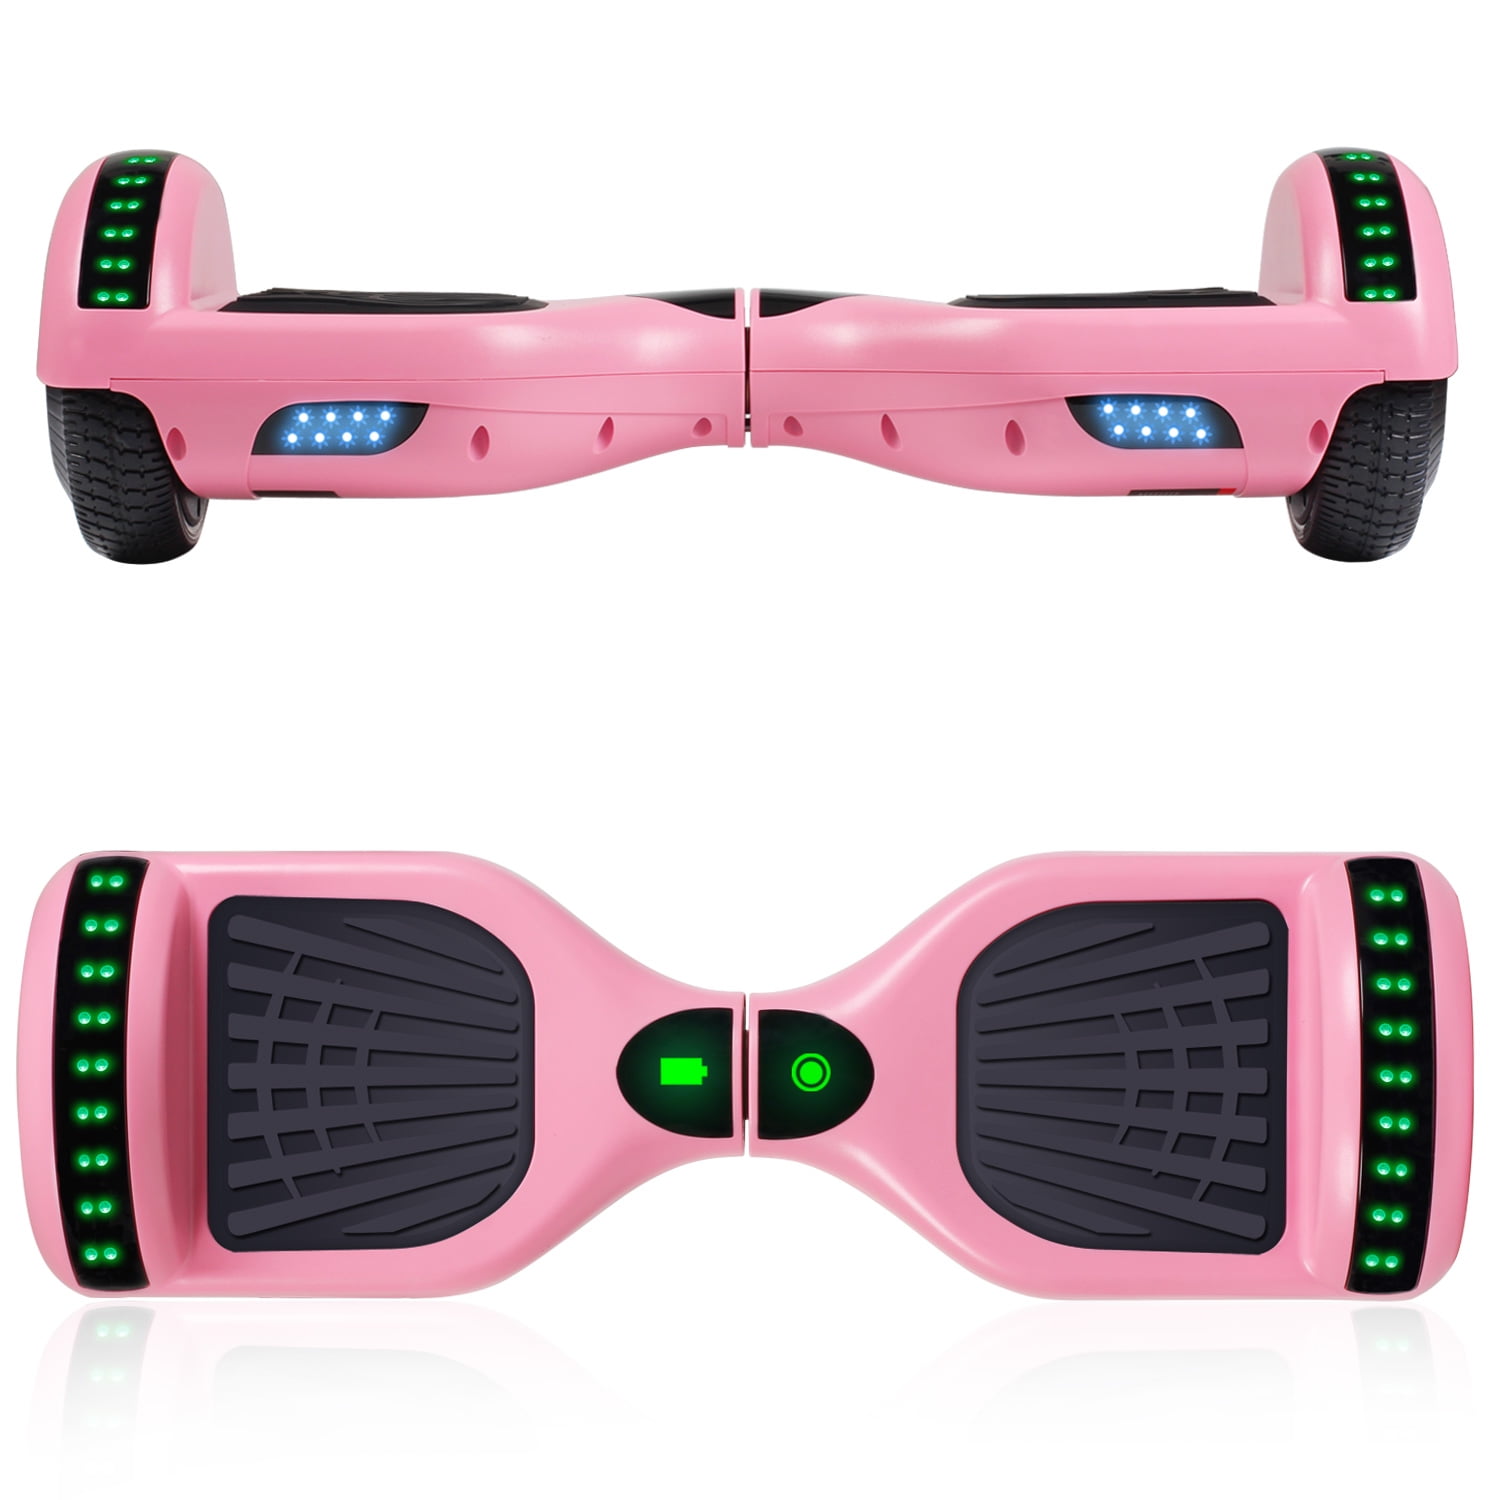 Details about   Hoverboard Electric Self Balancing Scooter Hoover Board For Kids no bag Green 